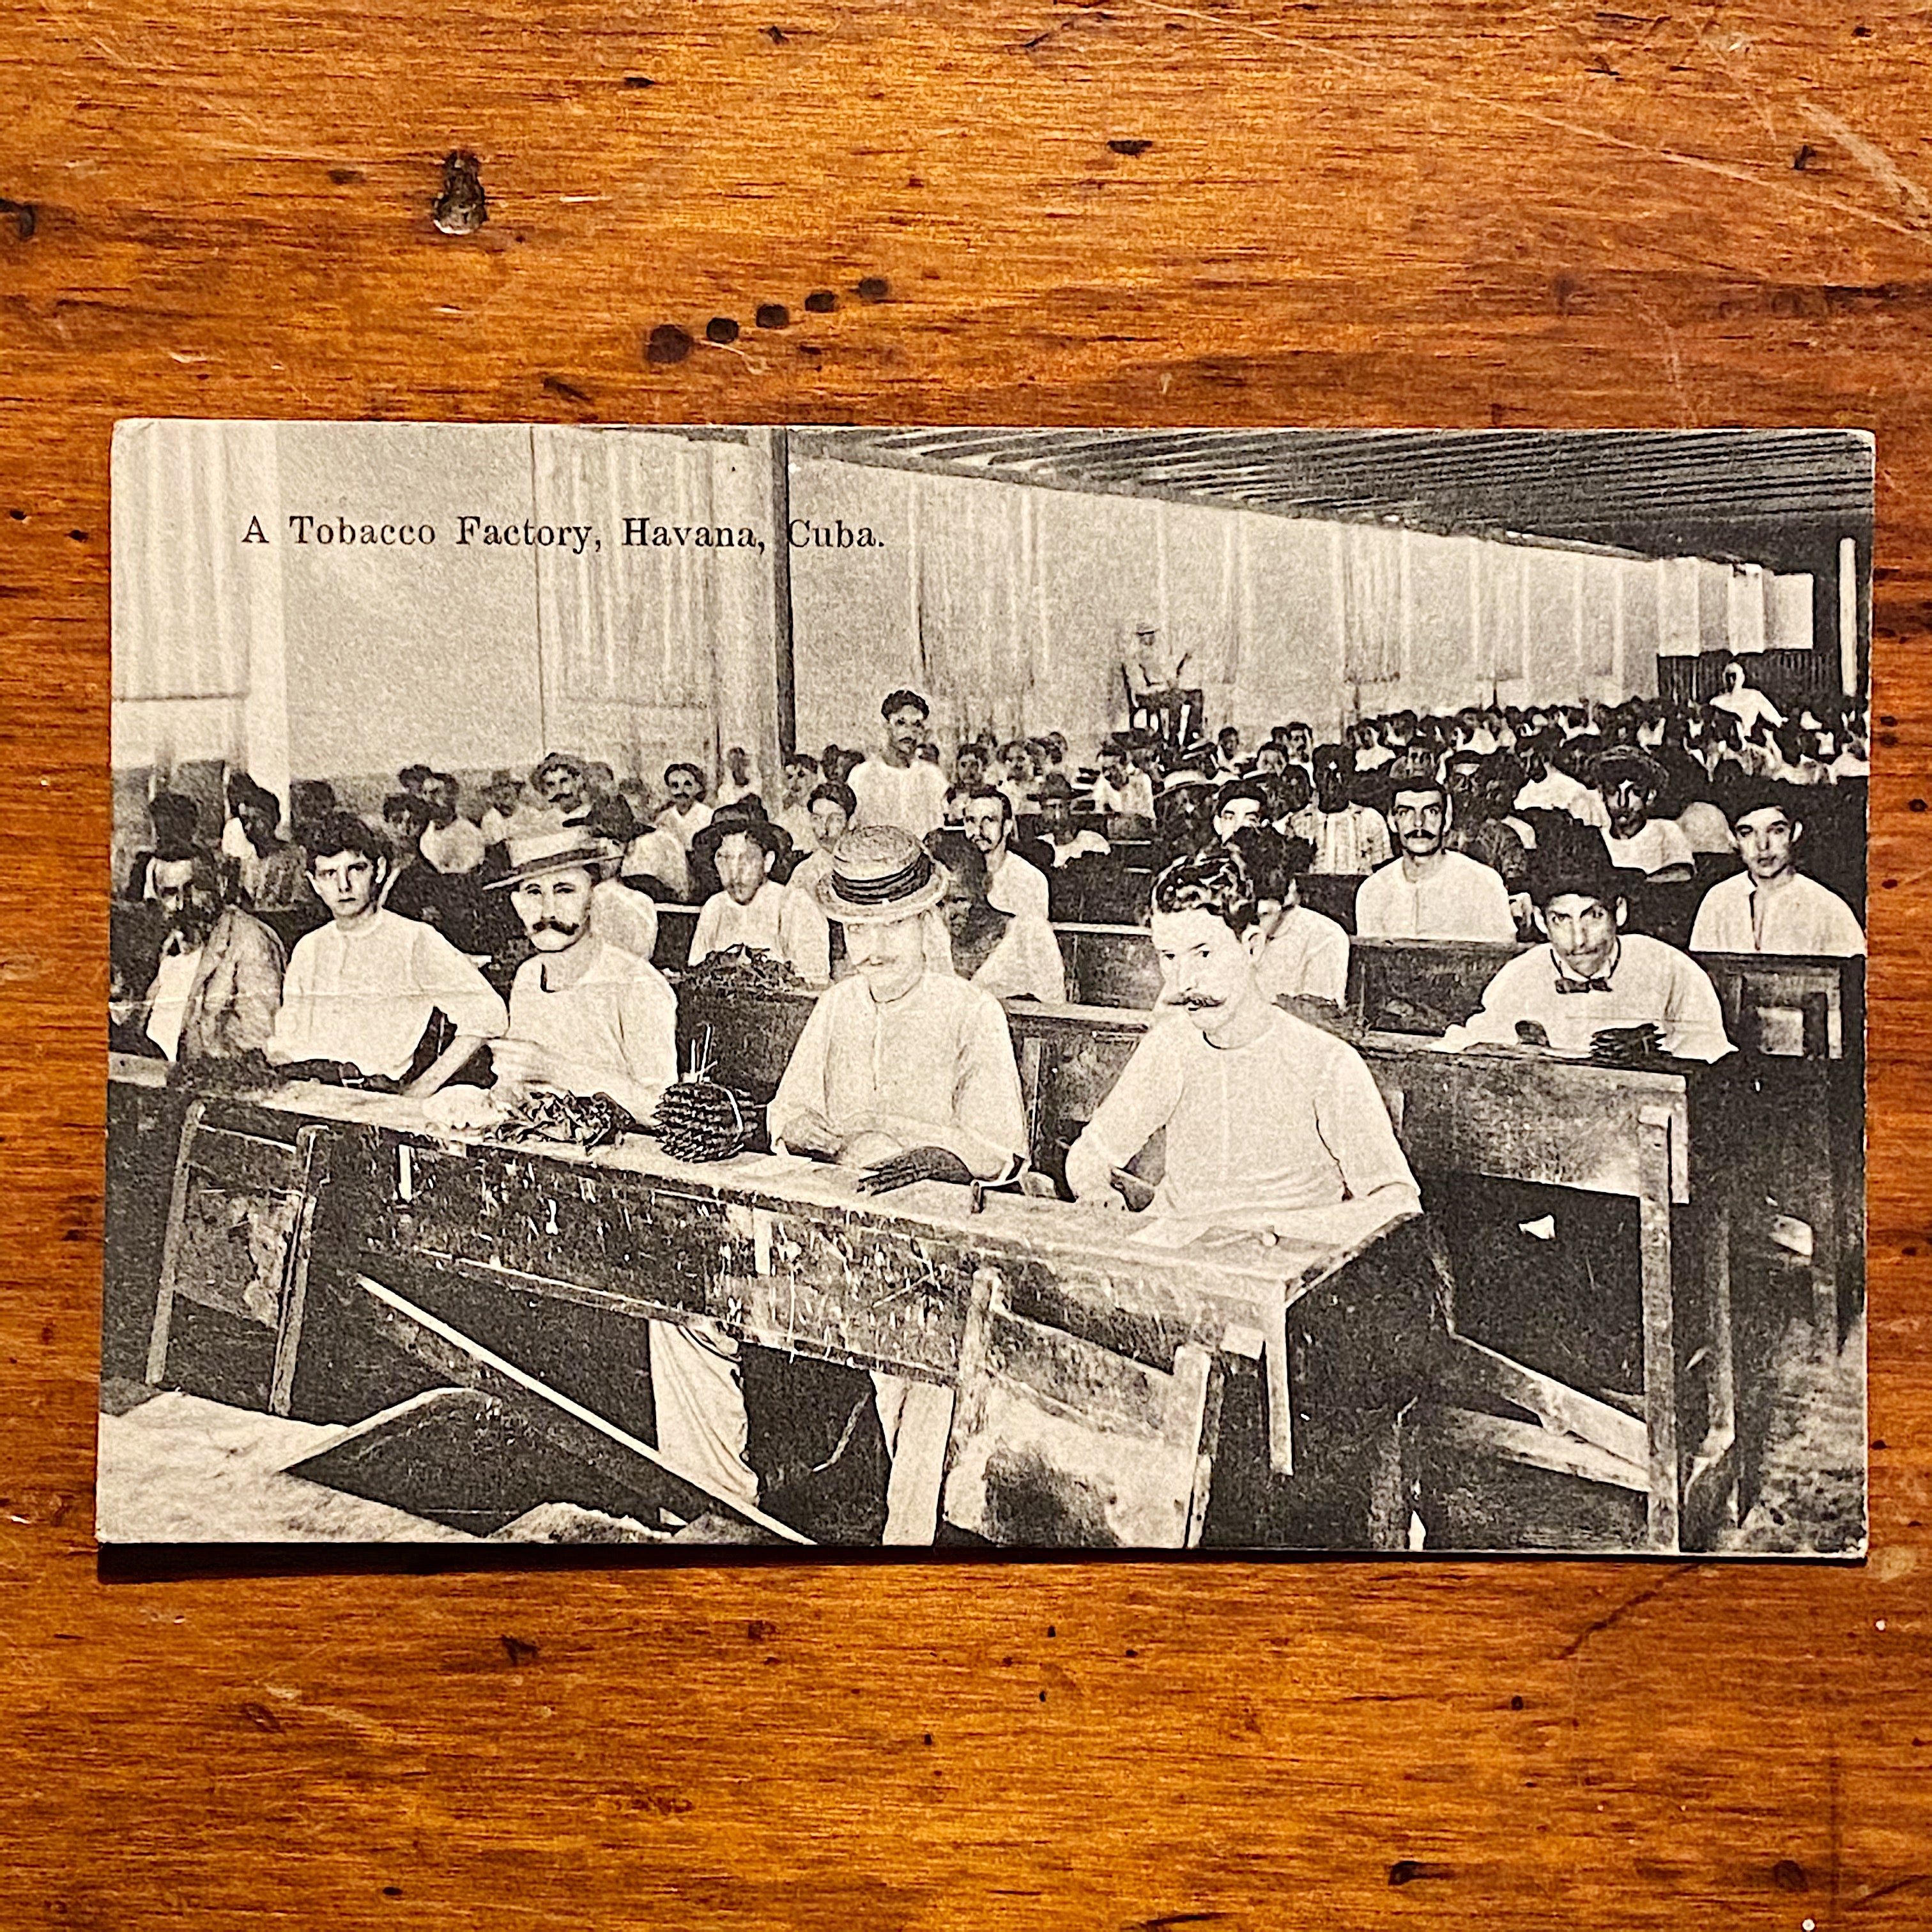 Tobacco Factory Antique RPPC of Cigar Factory - Early 1900s Tobacciana Postcards - Foreign Country Color Postcard - Rare Photography from Early 1900s